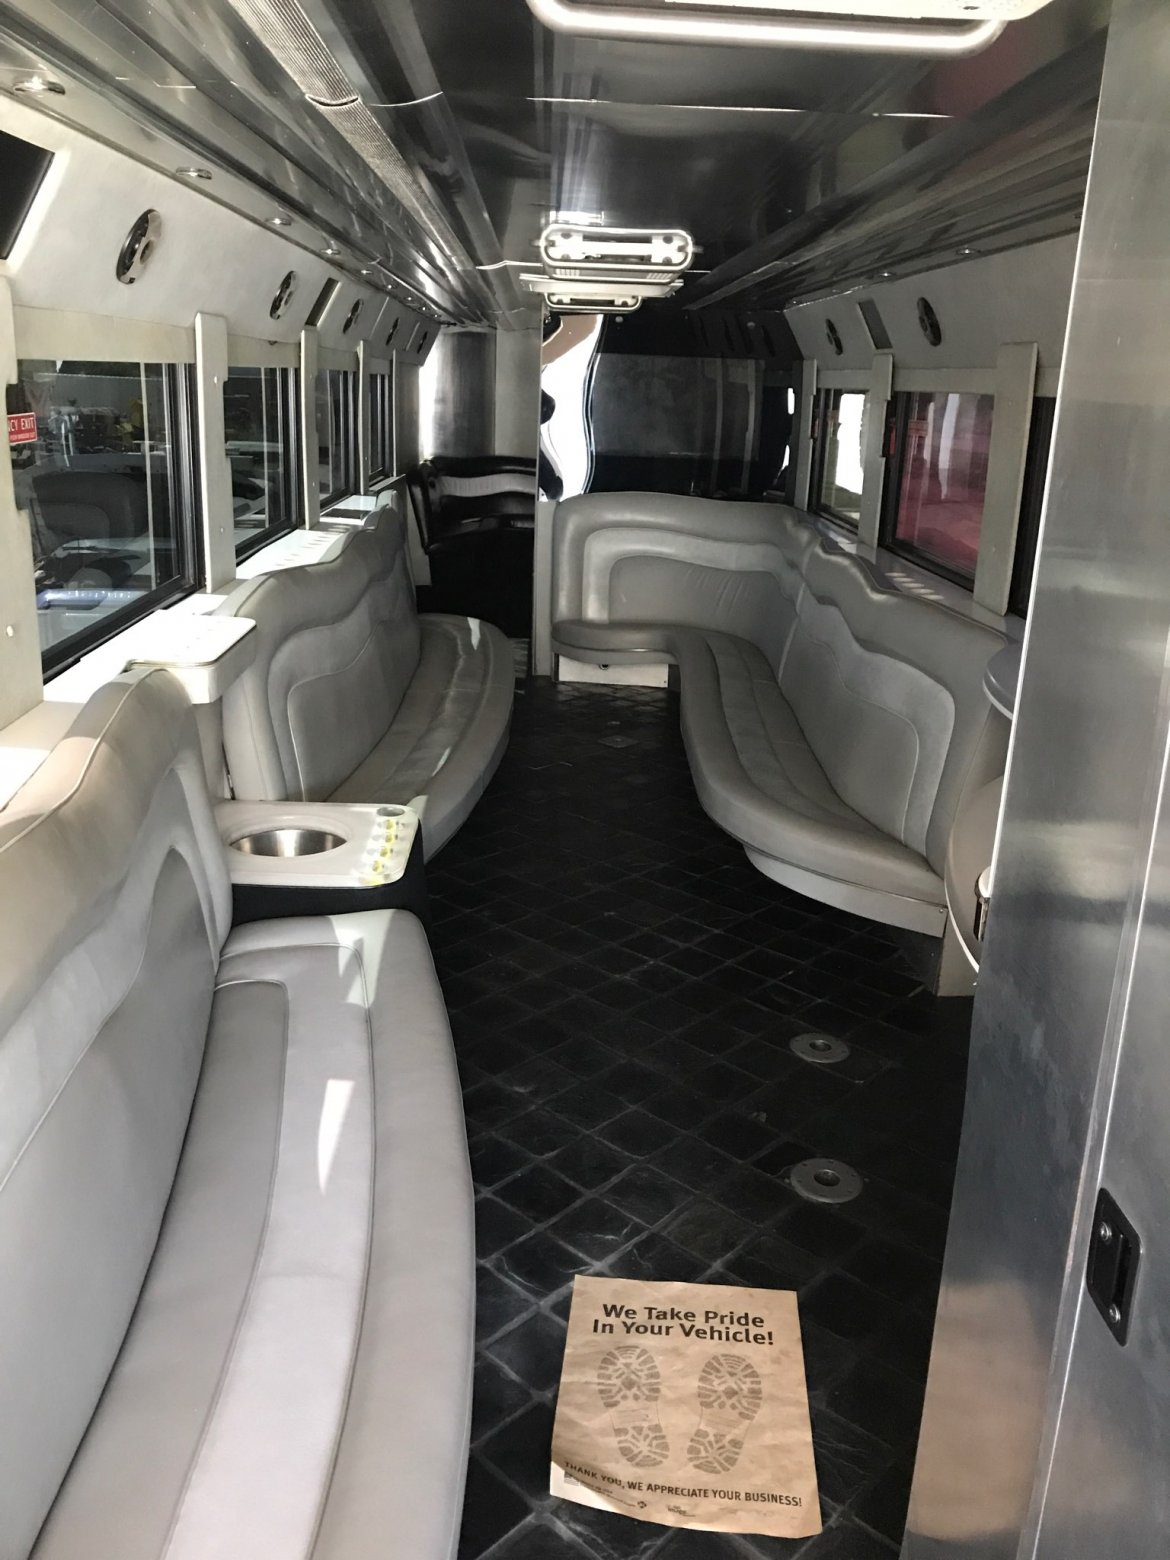 Limo Bus for sale: 2008 Freightliner Craftsman Coach Limousine Bus 500&quot; by Freightliner